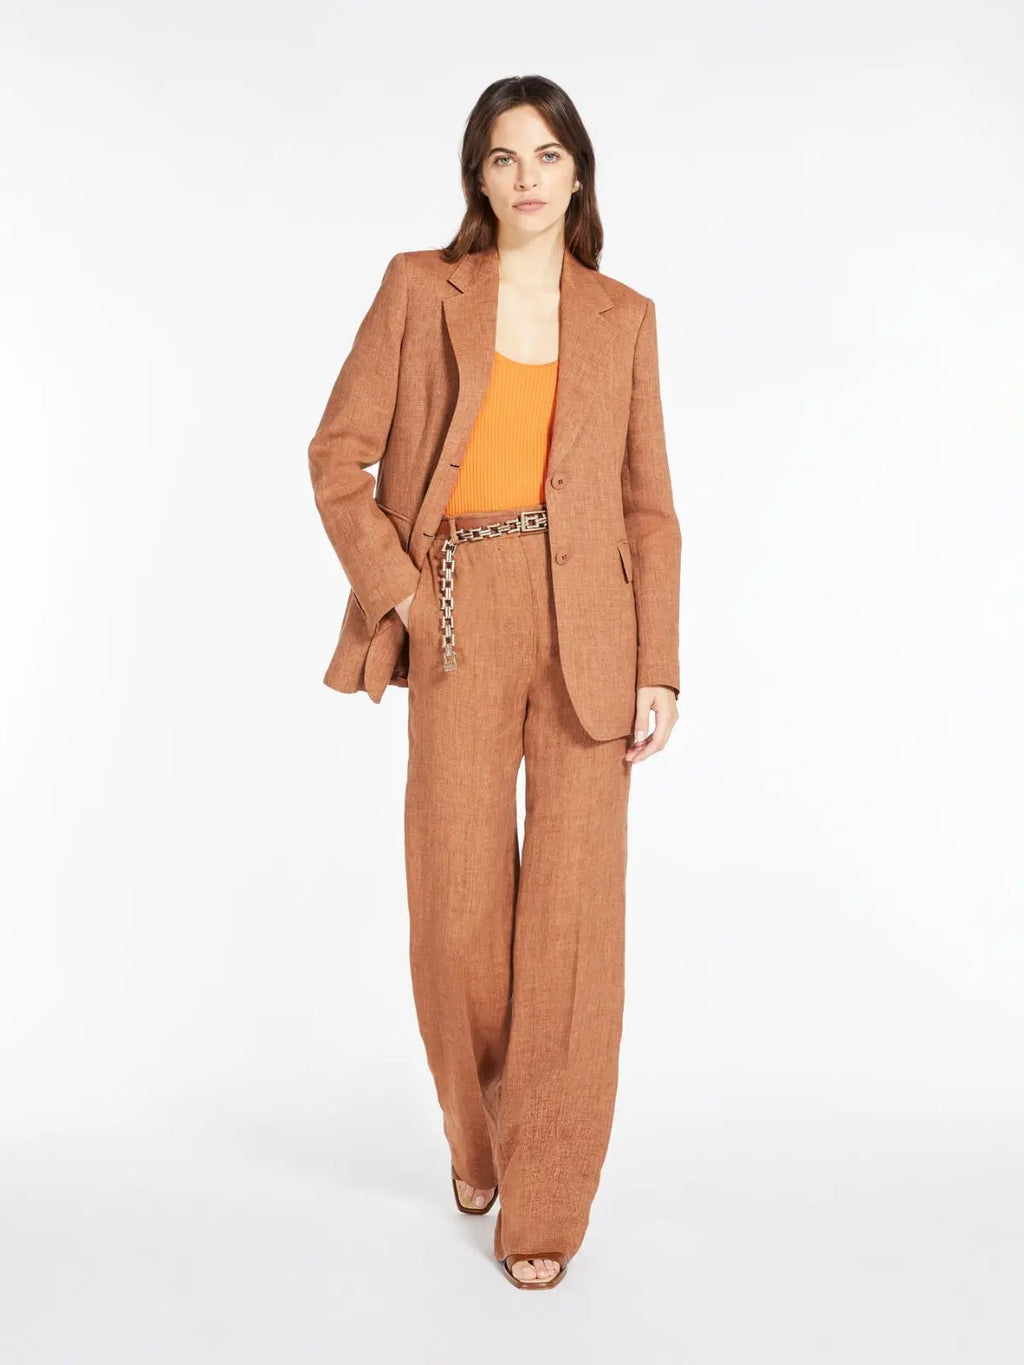 Enhance your personal style with the Veste Jade, an exquisite duo consisting of a unique French-inspired blazer and wide-legged trousers. Designed for the contemporary and refined woman who appreciates individuality and effortless elegance. Embody the spirit of Max Mara and elevate your look with this chic ensemble.